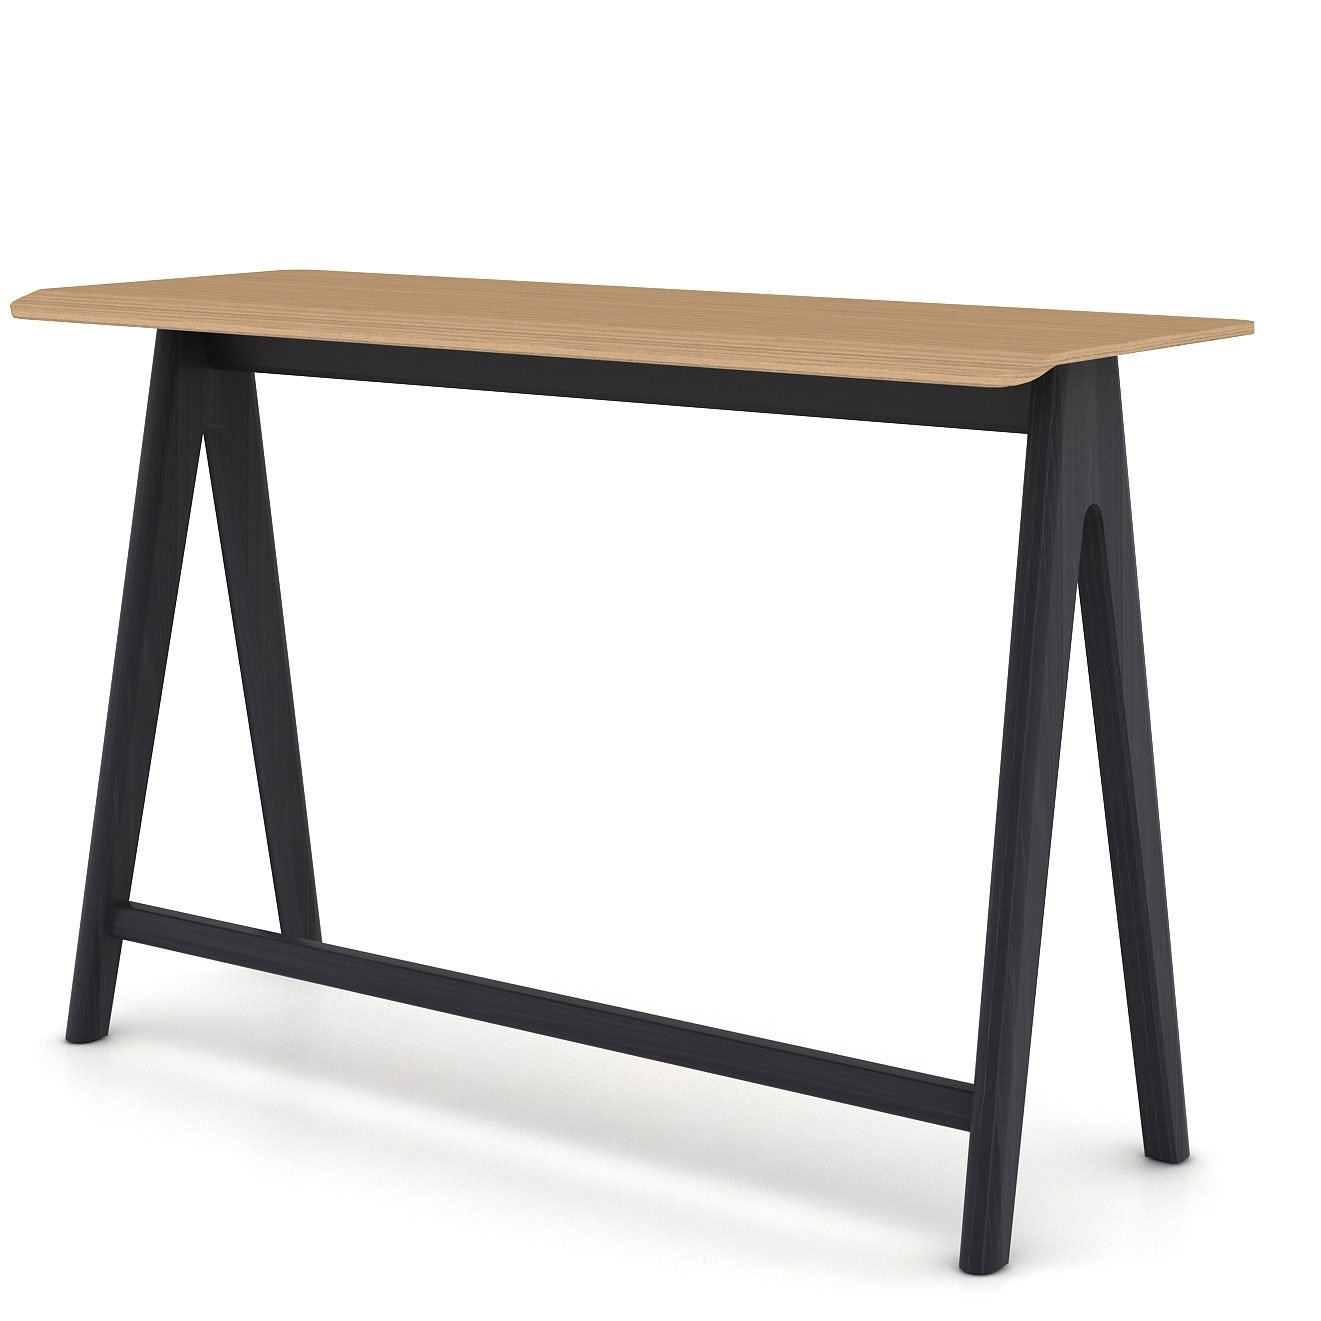 Haworth Immerse Table with 4 legs and narrow rectangular top with slanted lip